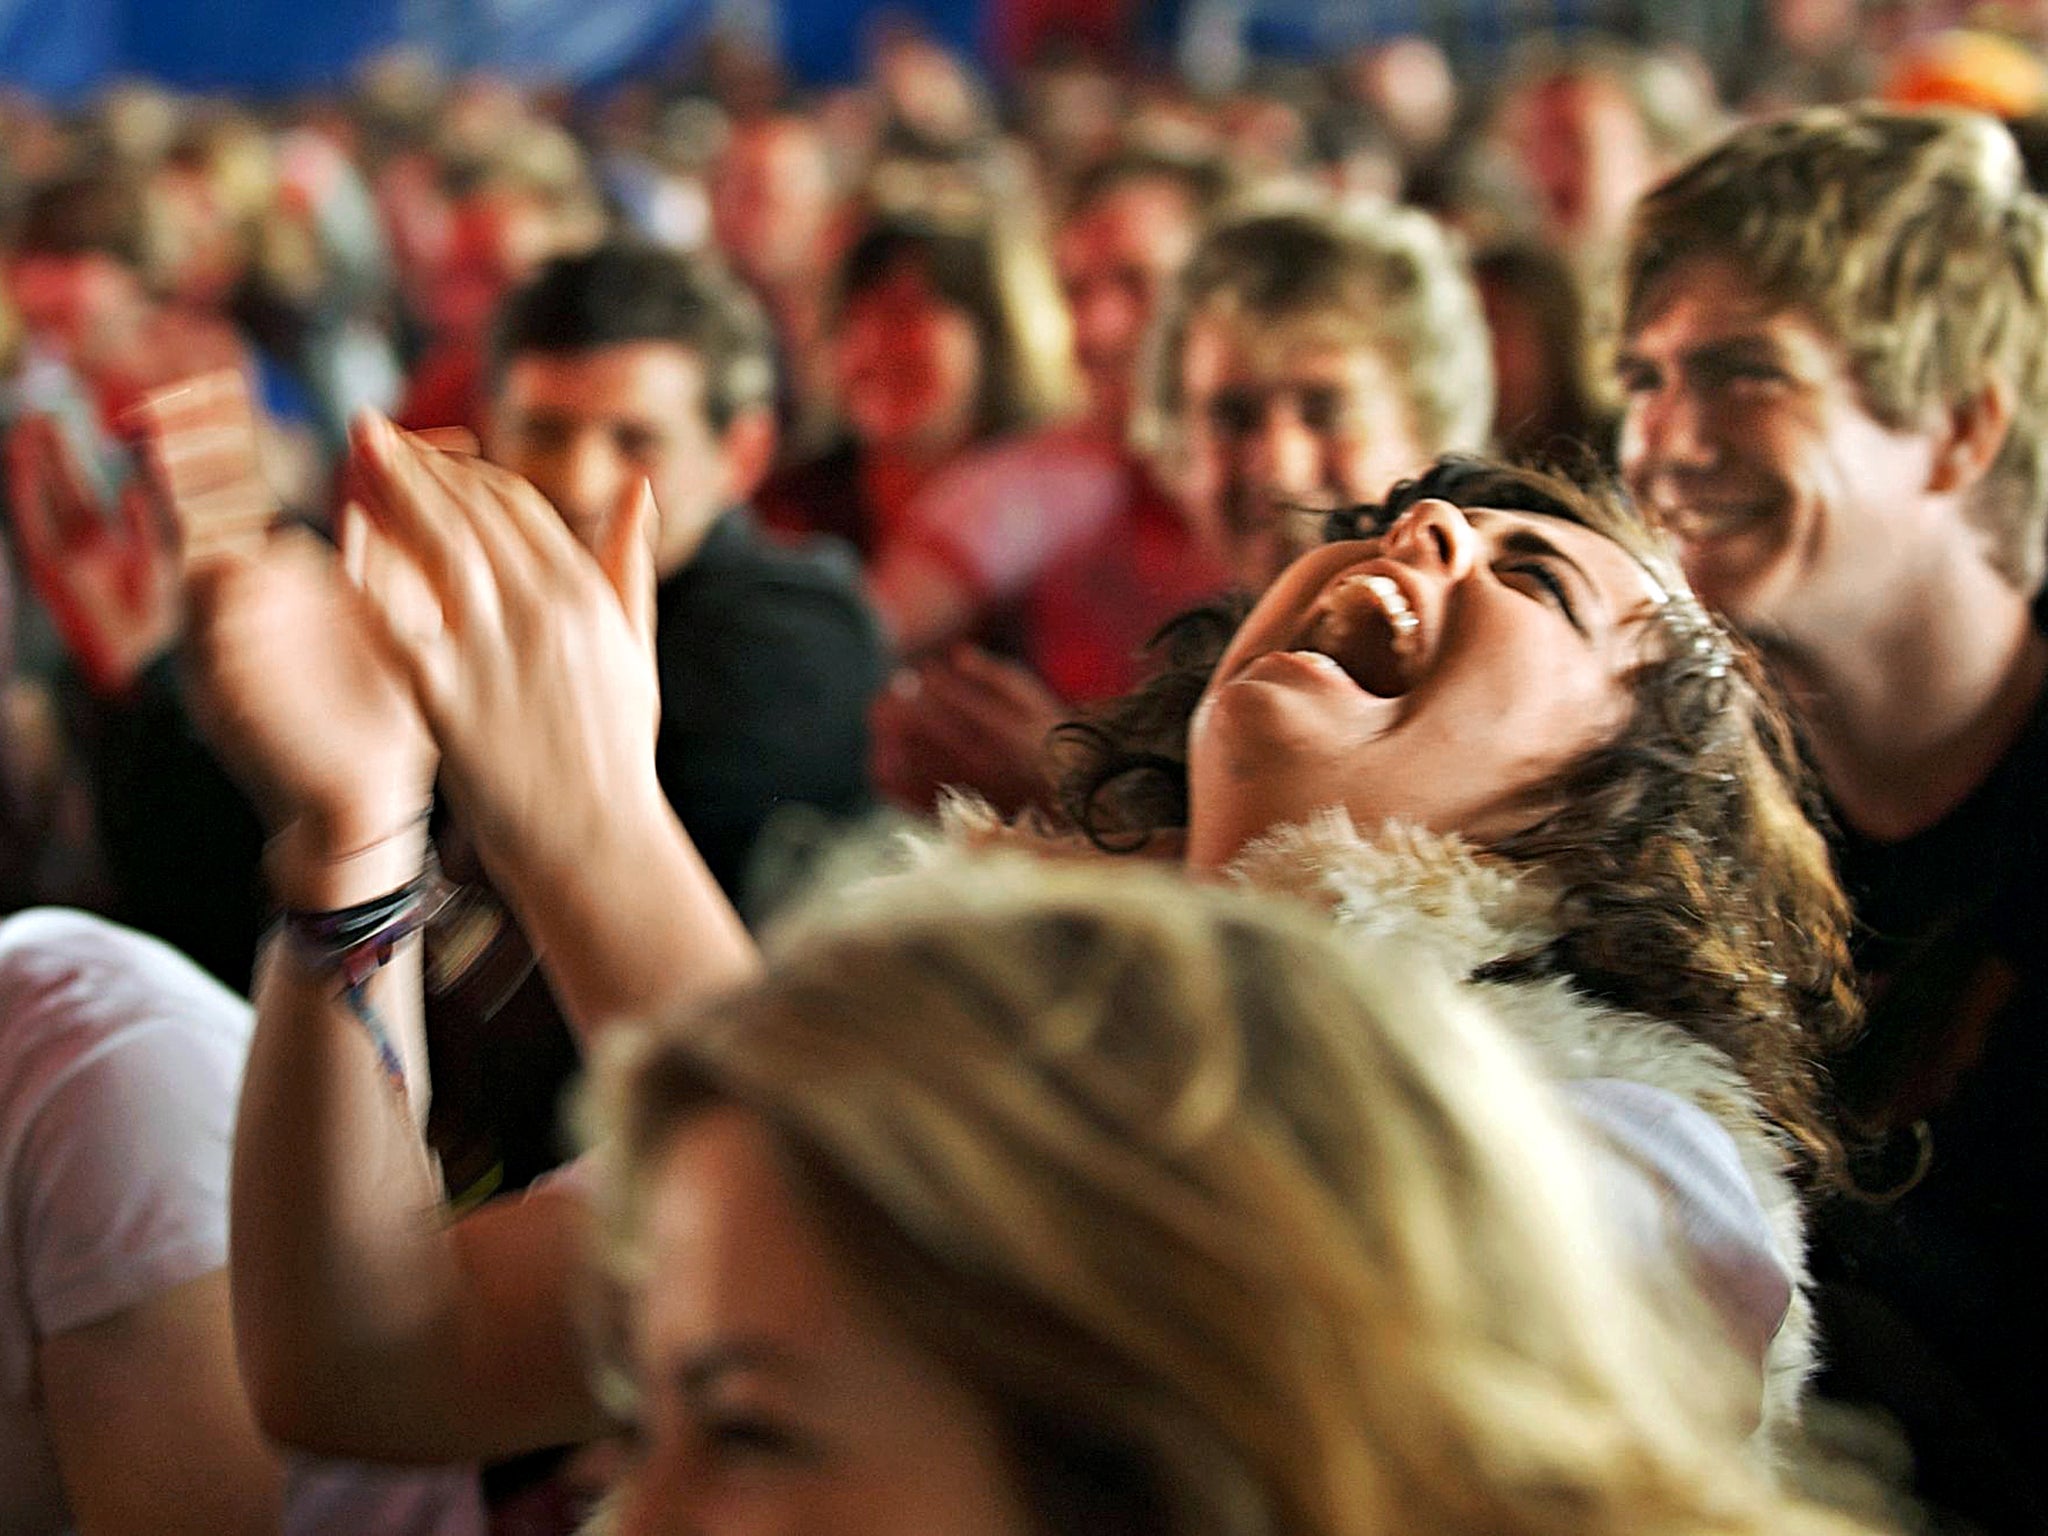 Lost in laughter: the audience at a stand-up gig